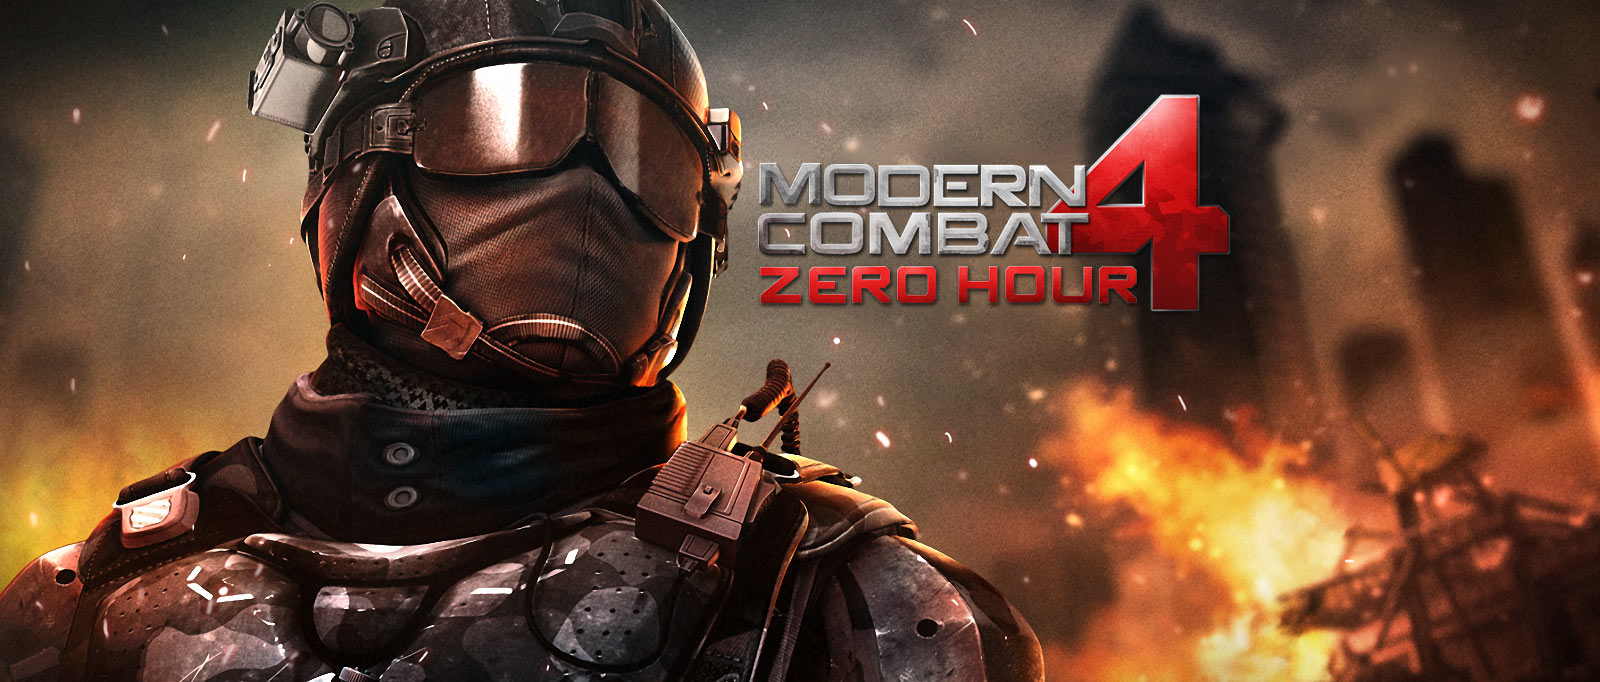 Modern Combat 4 Apk Free Download For Android